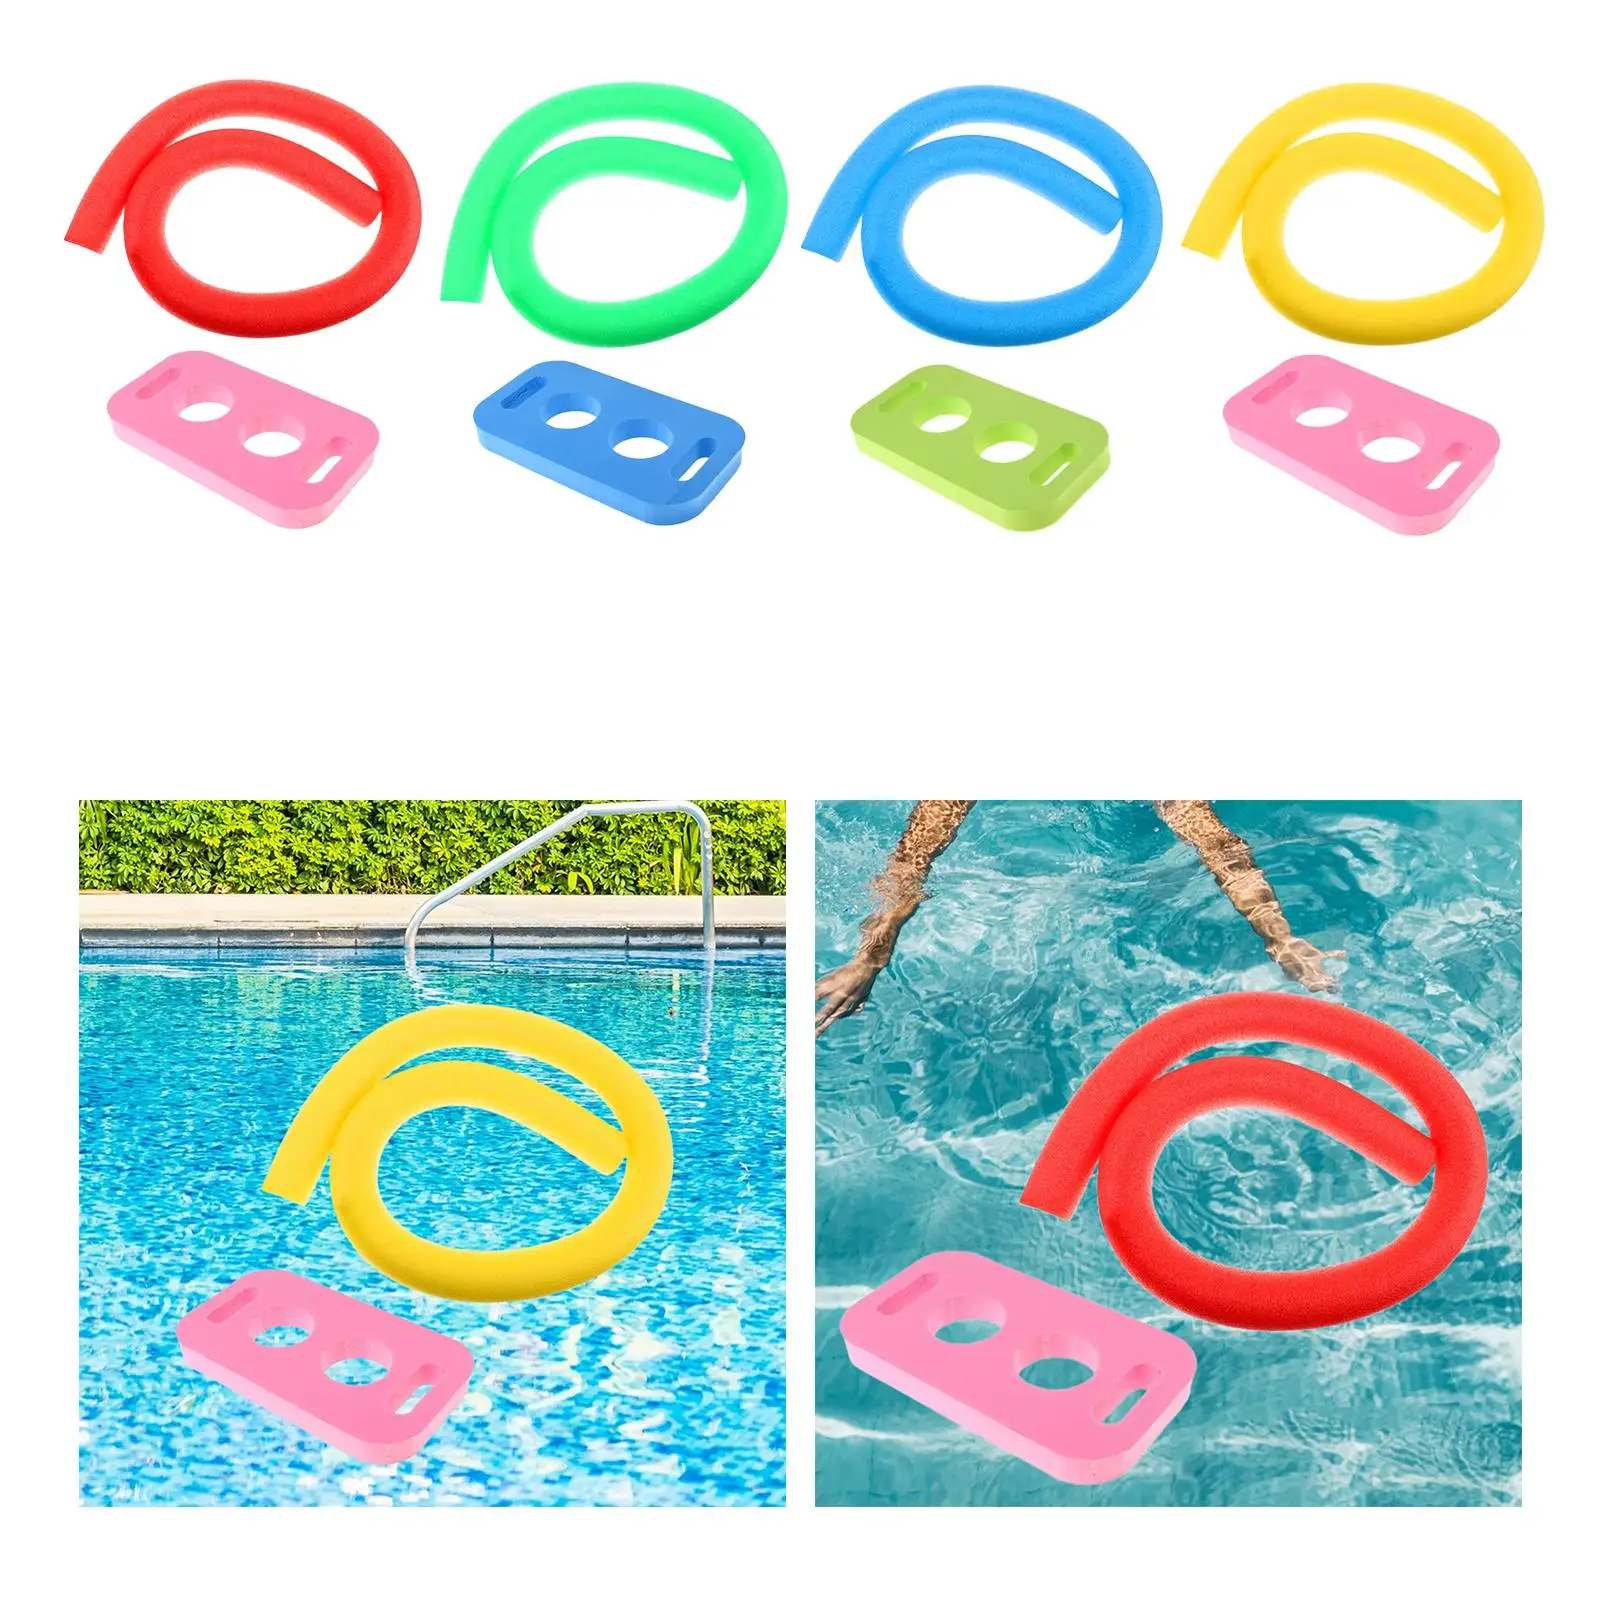 Floating Pool Noodle Water Game Floats Foam Tube for Pool Swimming Outdoor